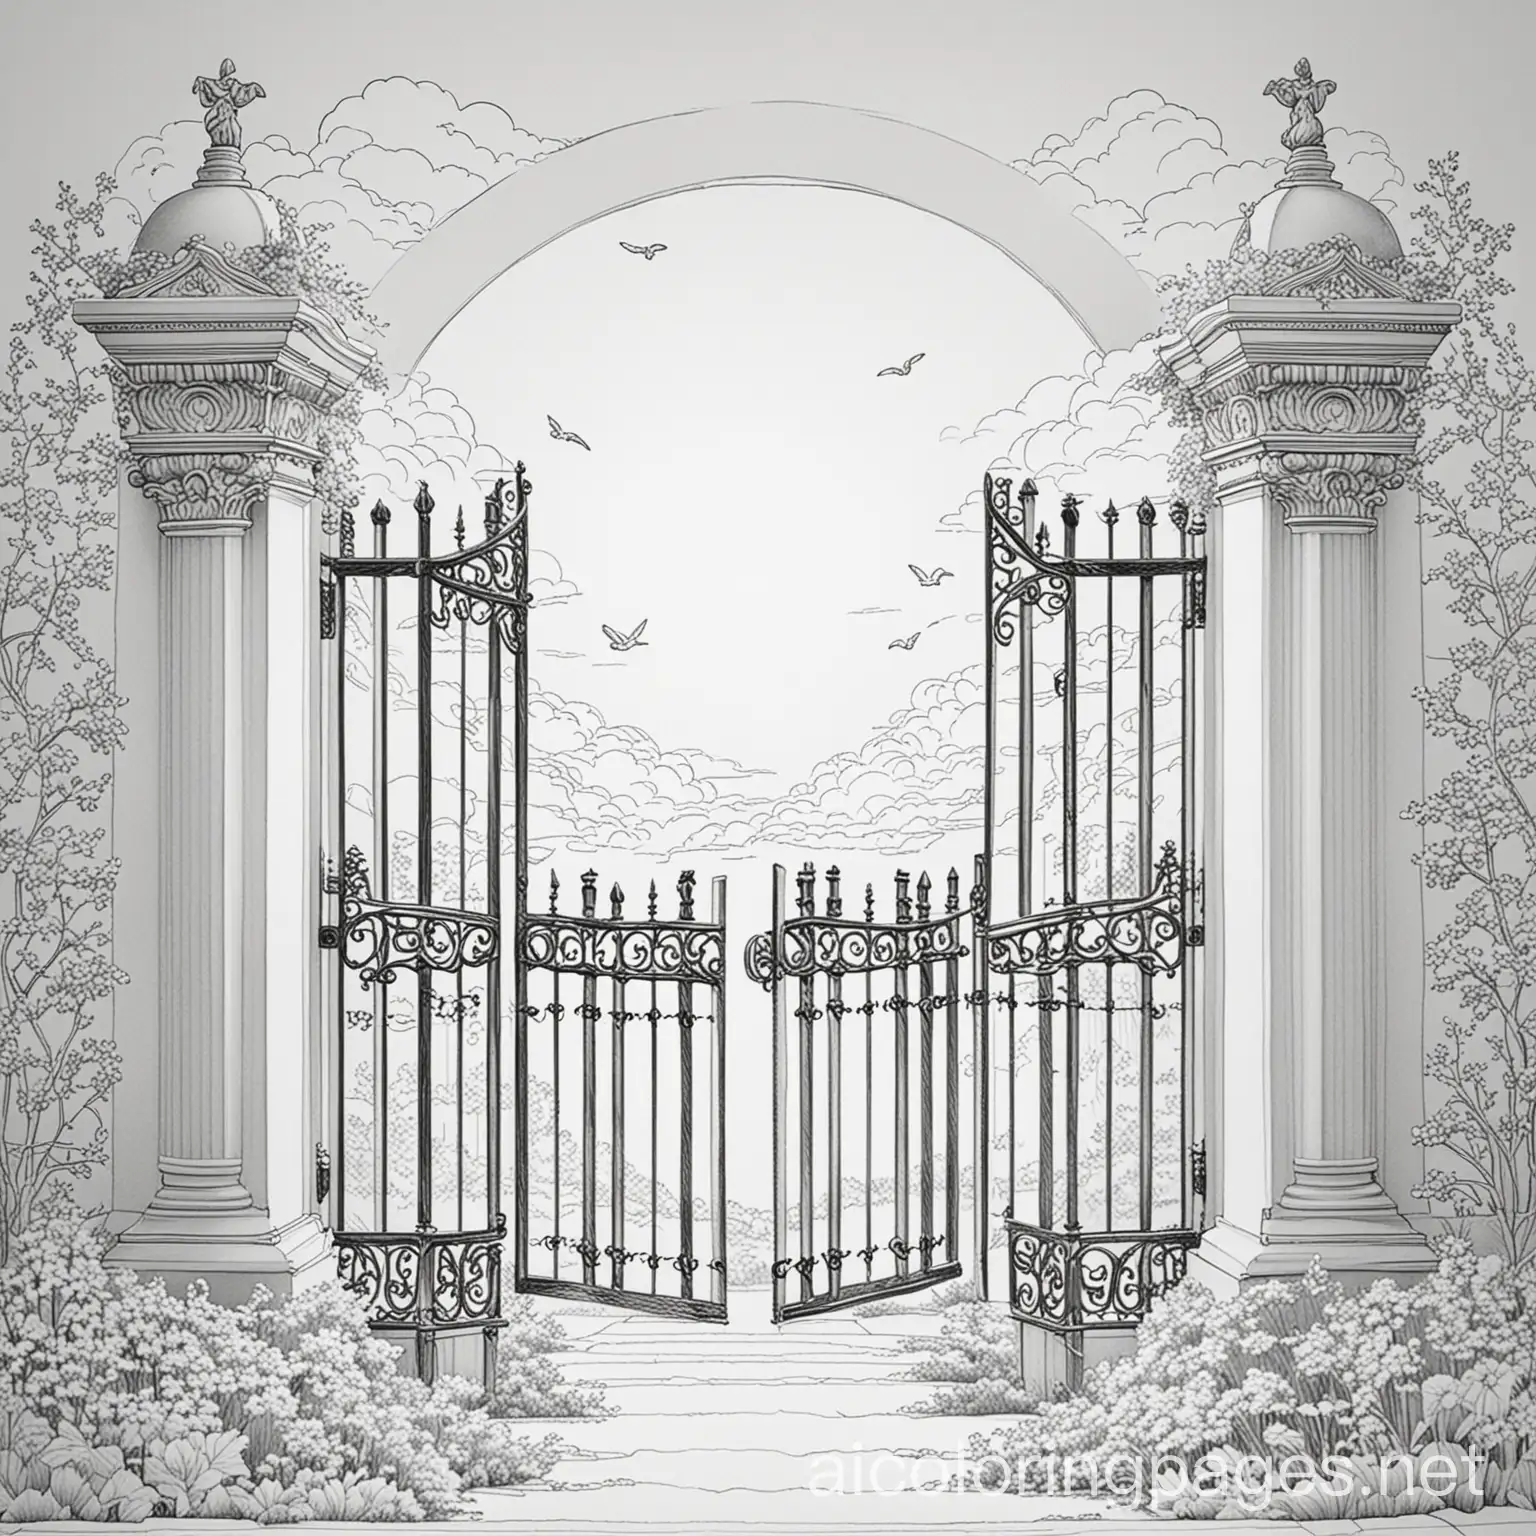 Heavens-Gates-Coloring-Page-Simple-Line-Art-for-Easy-Coloring